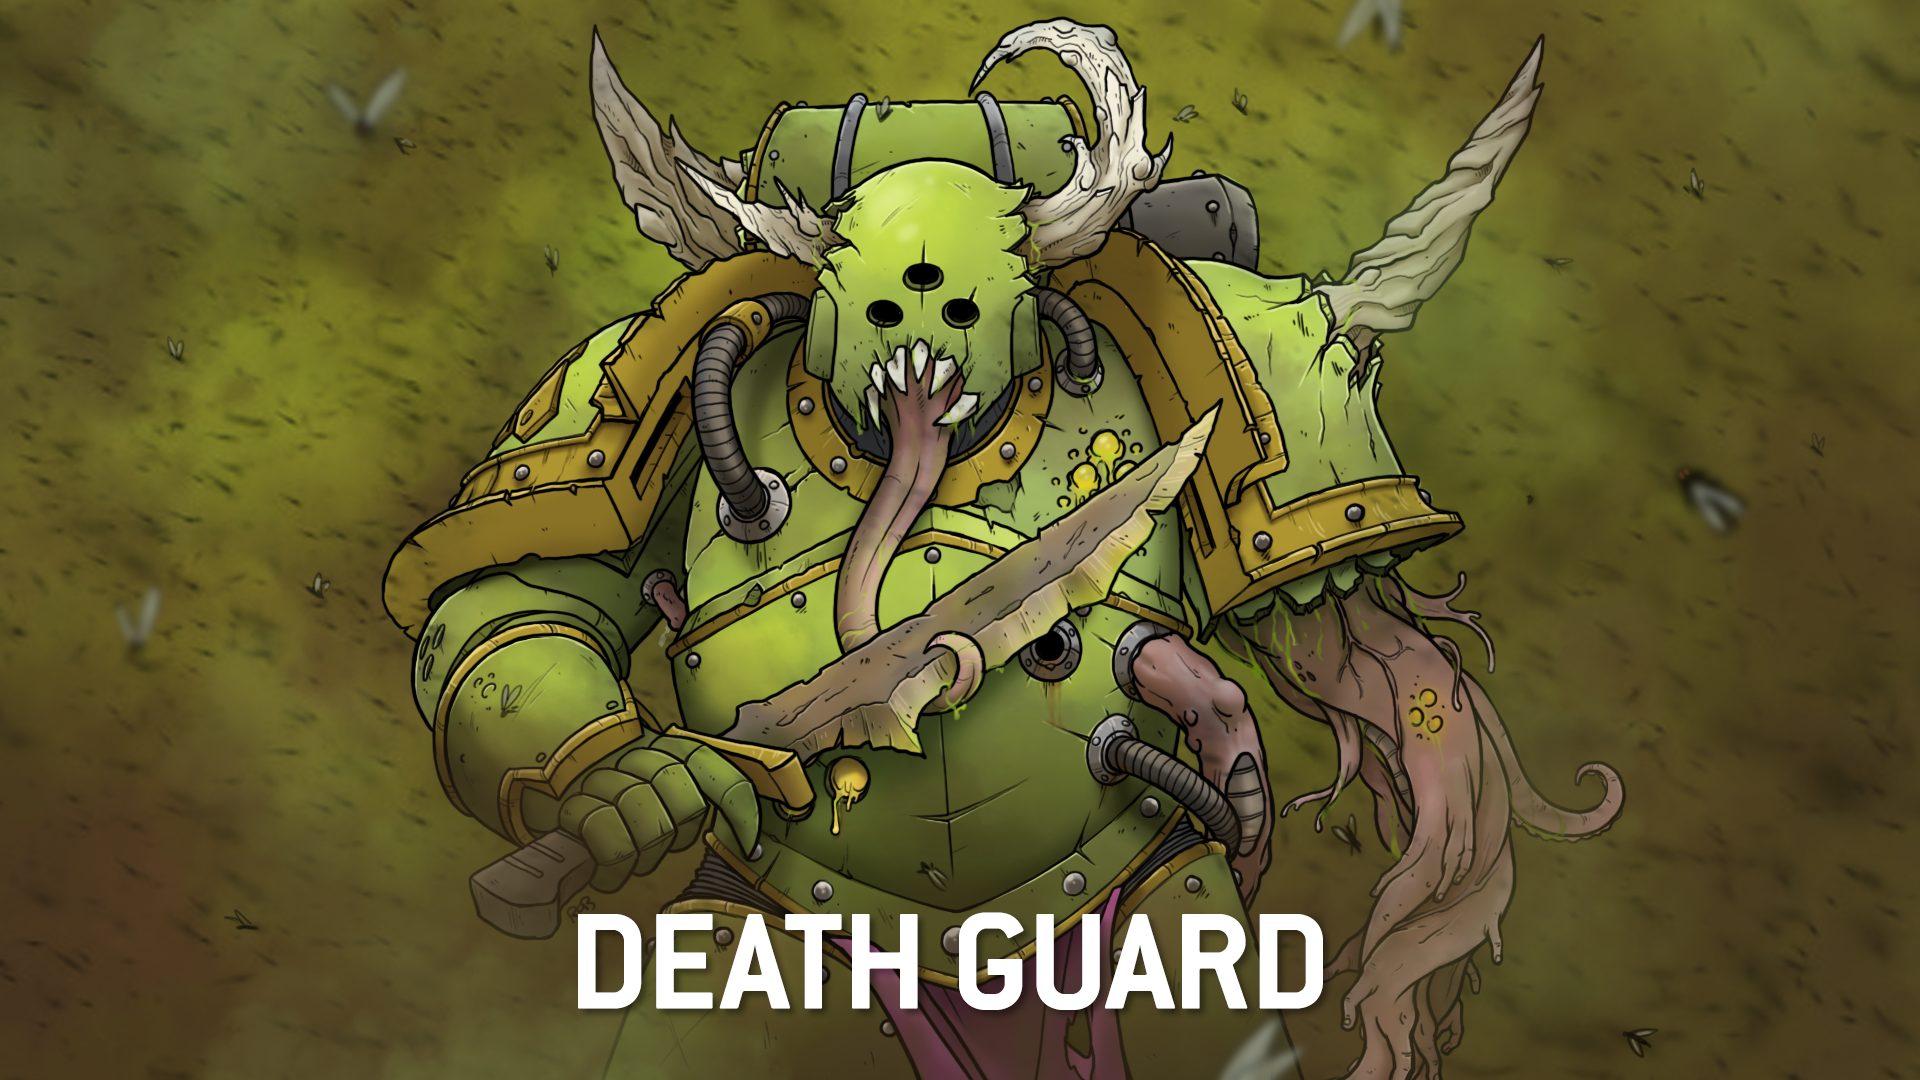 Death Guard - 40K / 30K Character Name Generator — Realm of Plastic